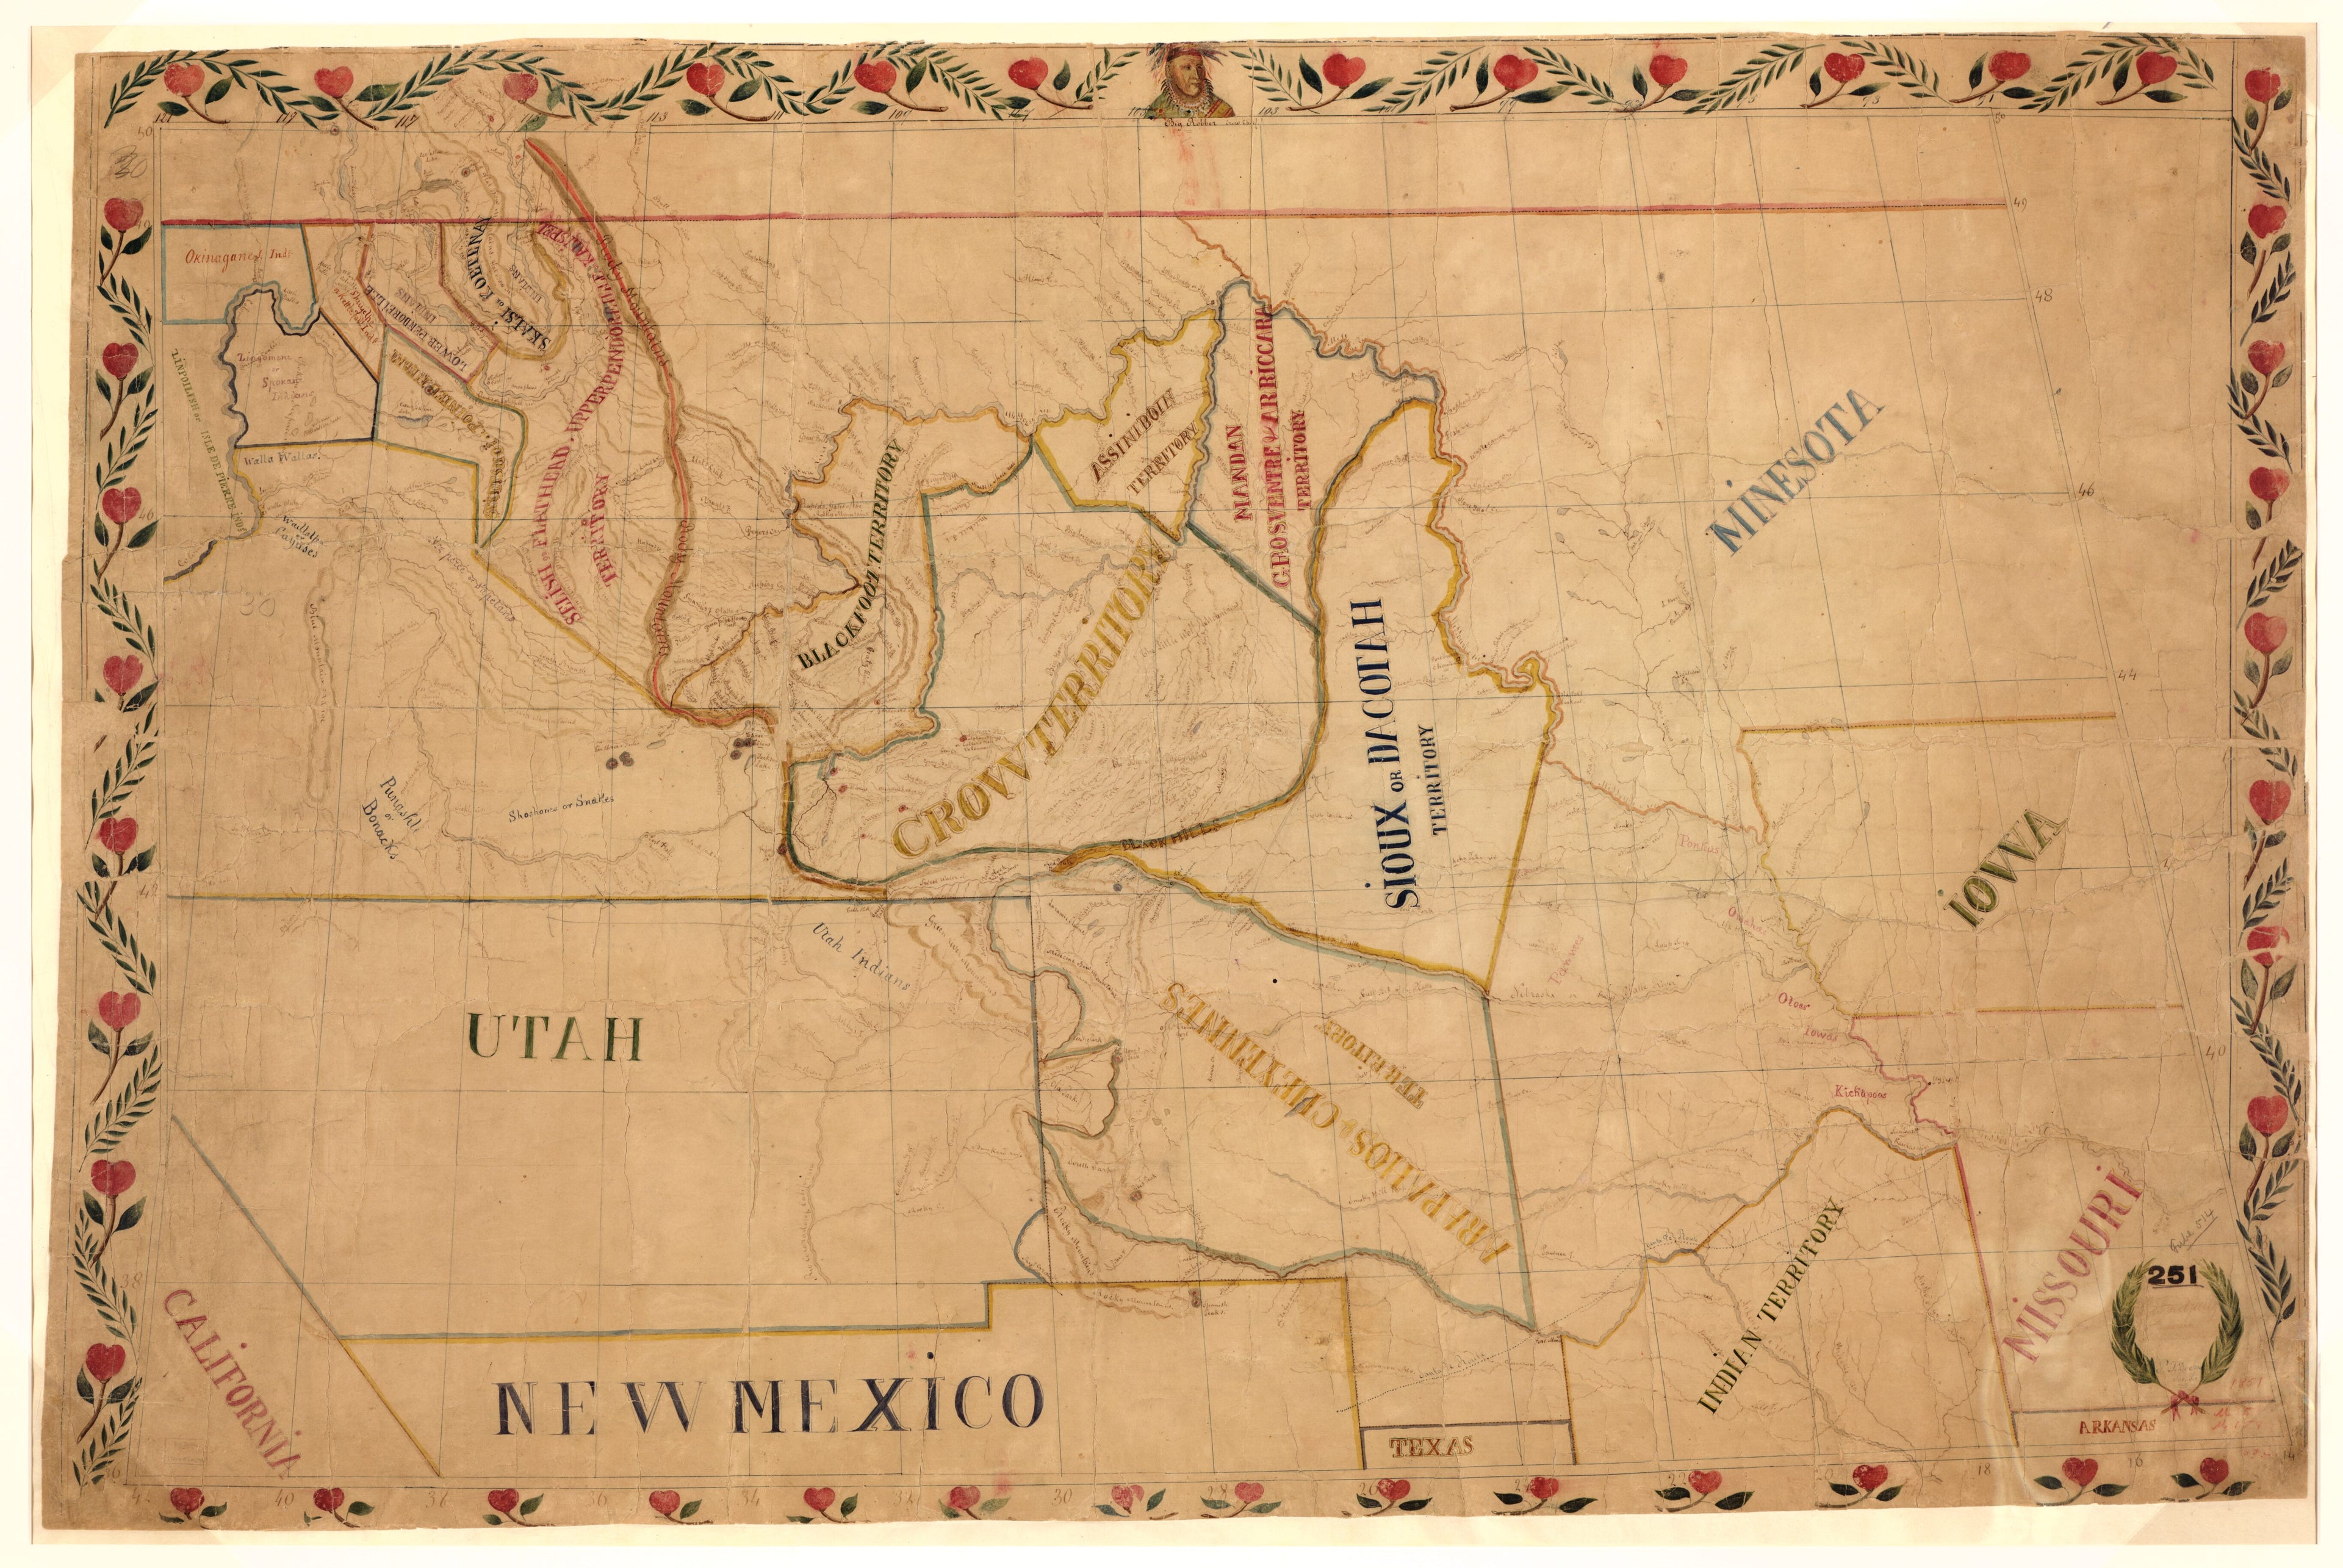 This old map of Map of the Upper Great Plains and Rocky Mountains Region from 1851 was created by  Jean in 1851